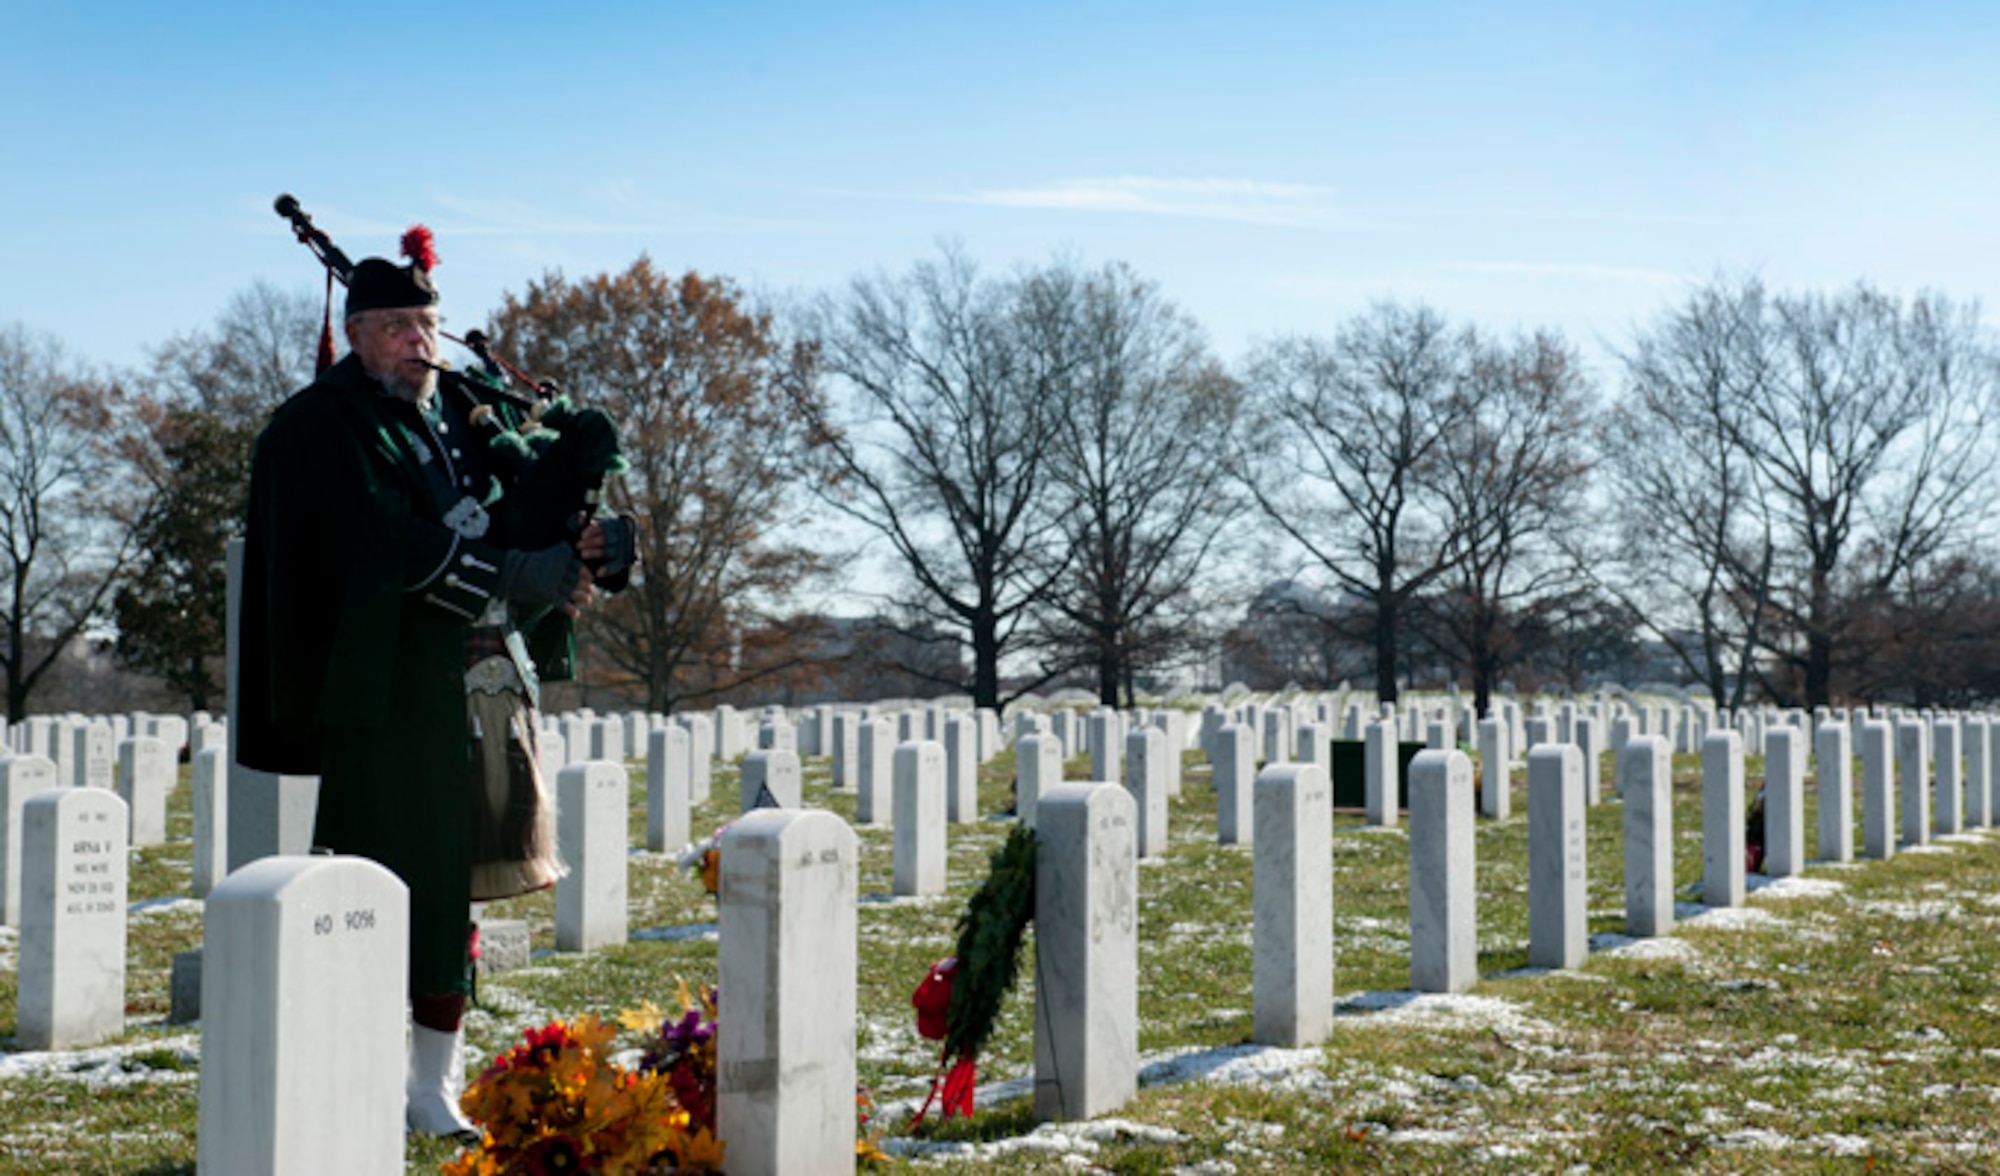 Bagpiper Norm Weaver gives a performance during Maj. Troy Gilberts’ remembrance funeral Dec. 11, 2013, at Arlington Cemetery, Va. Gilbert was an F-16 Fighting Falcon pilot whose aircraft crashed on Nov. 27, 2006 during Operation Iraqi Freedom.  (U.S. Air Force photo/Staff Sgt. Carlin Leslie)